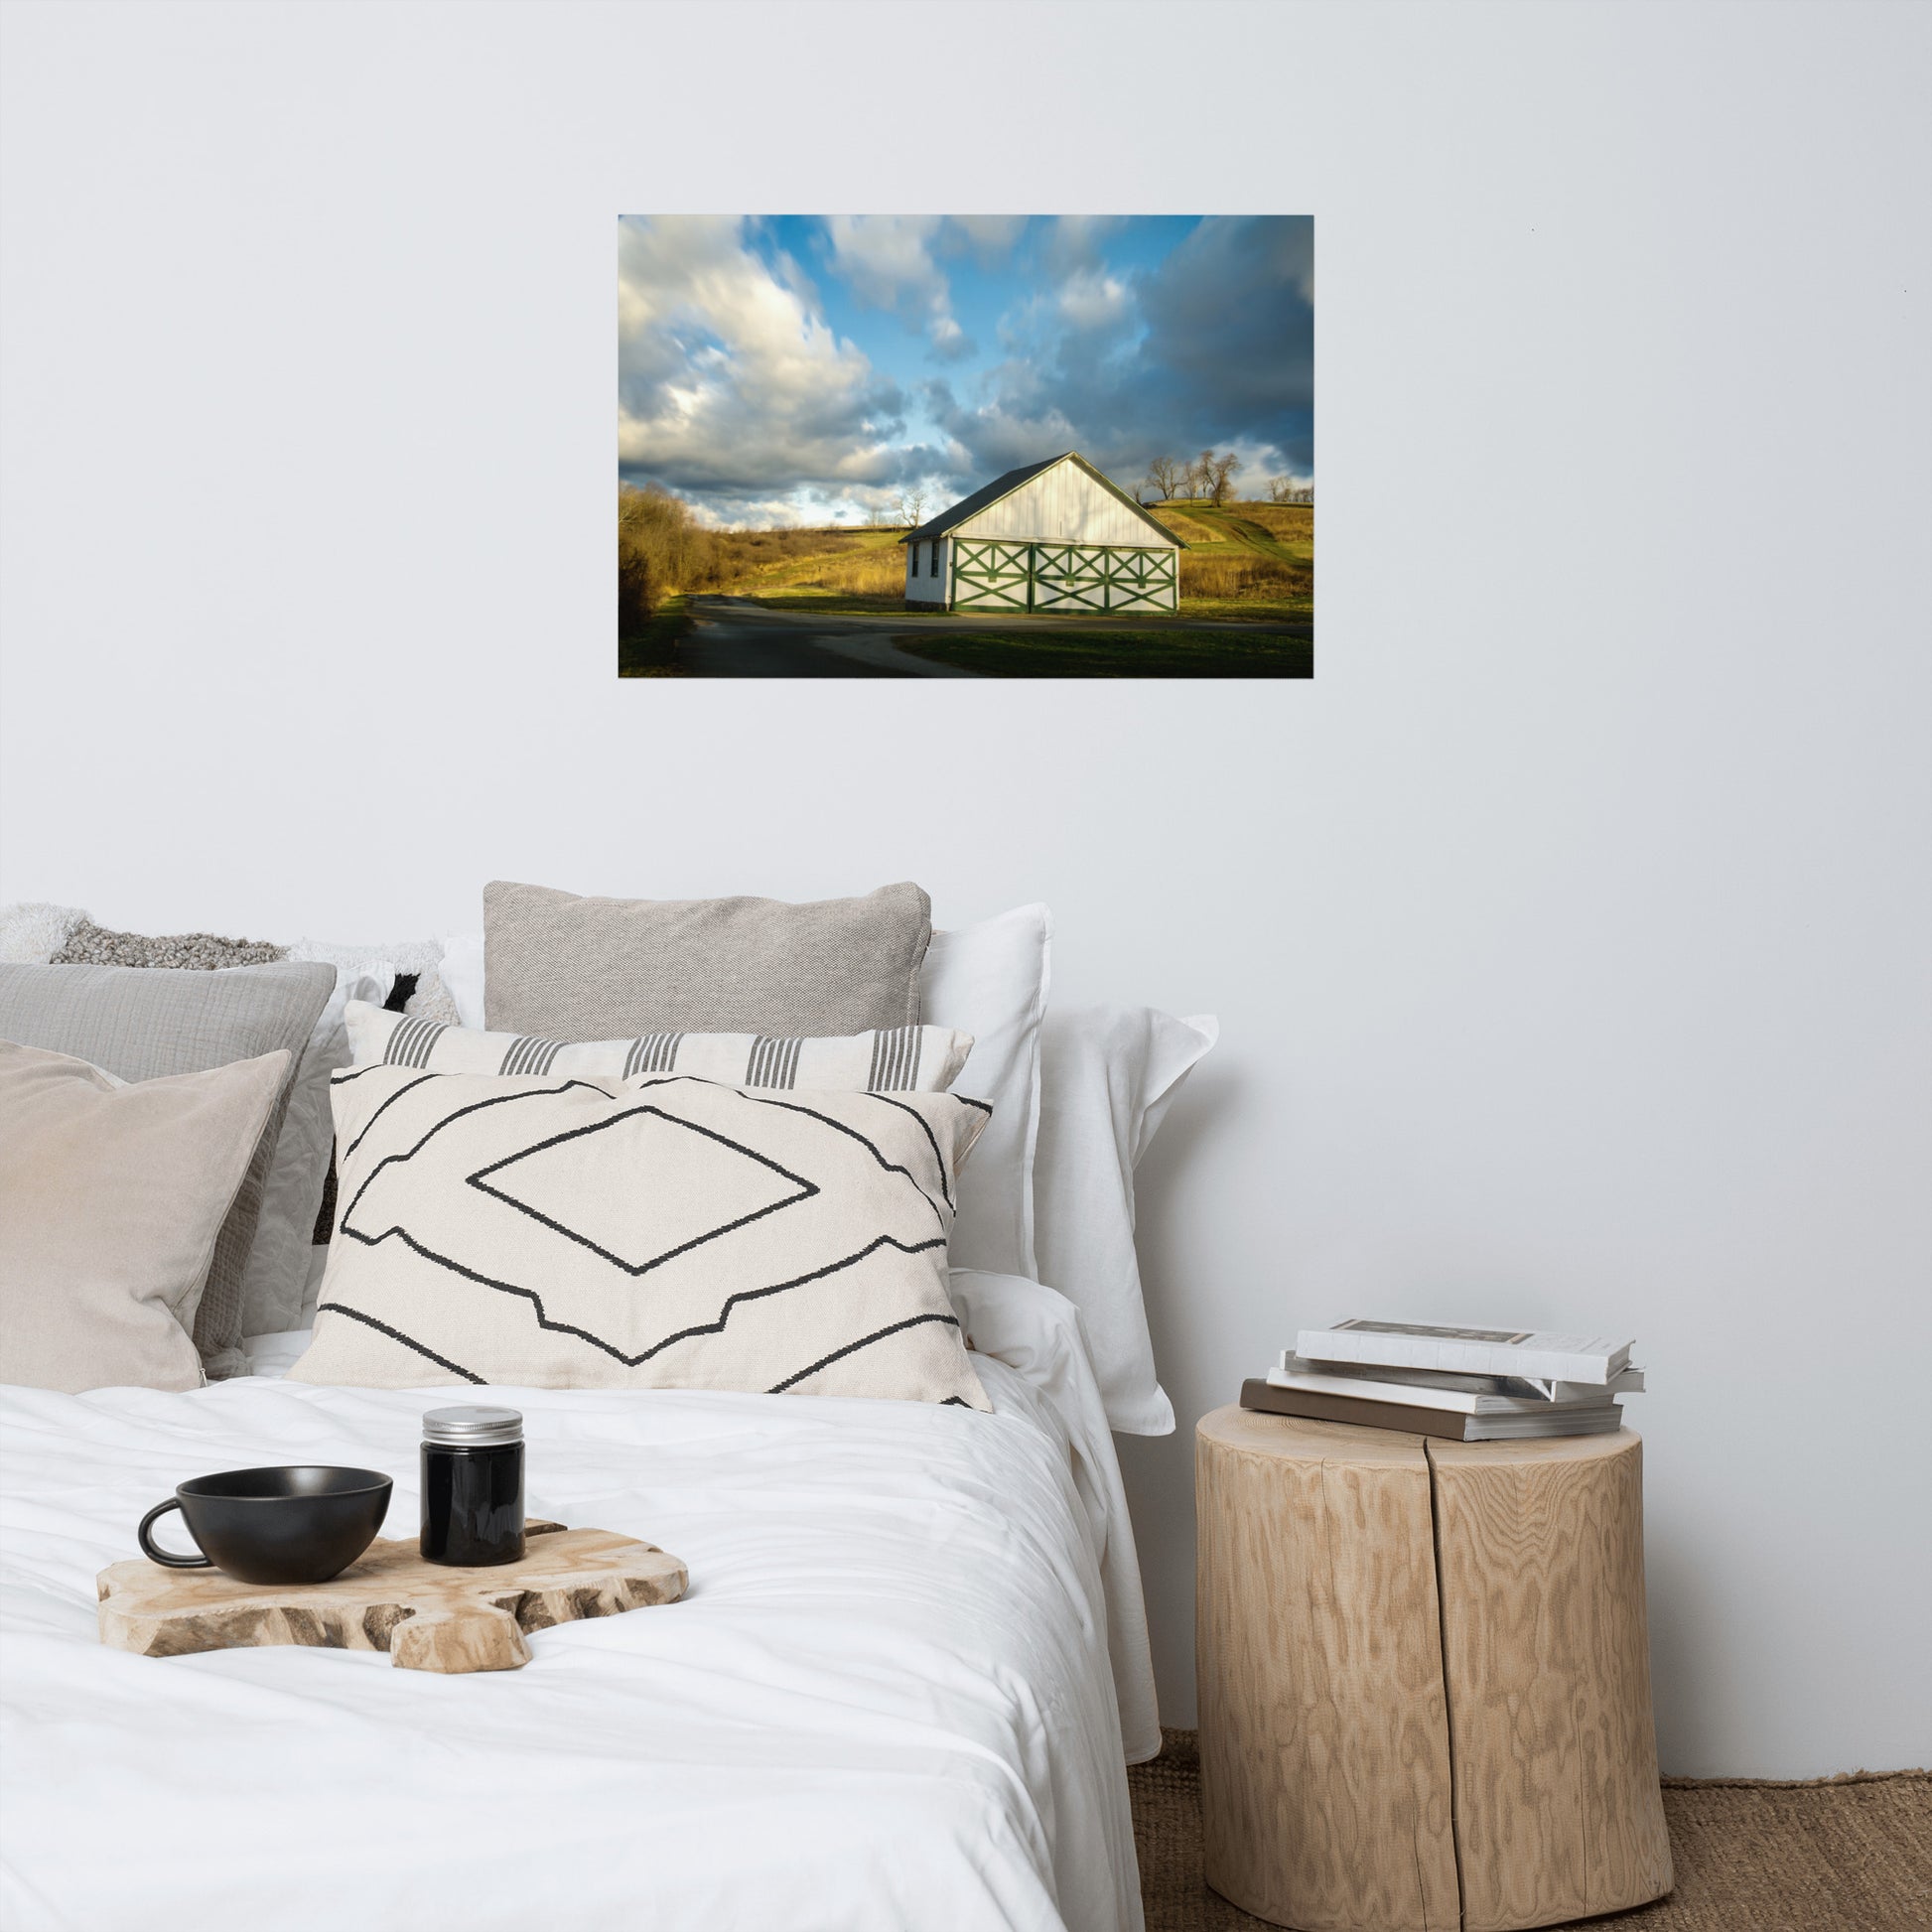 Neutral Bedroom Art: White and Green Barn in Meadow Rustic - Rural / Country Style Landscape / Nature Photograph Loose / Unframed / Frameable / Frameless Wall Art Print - Artwork